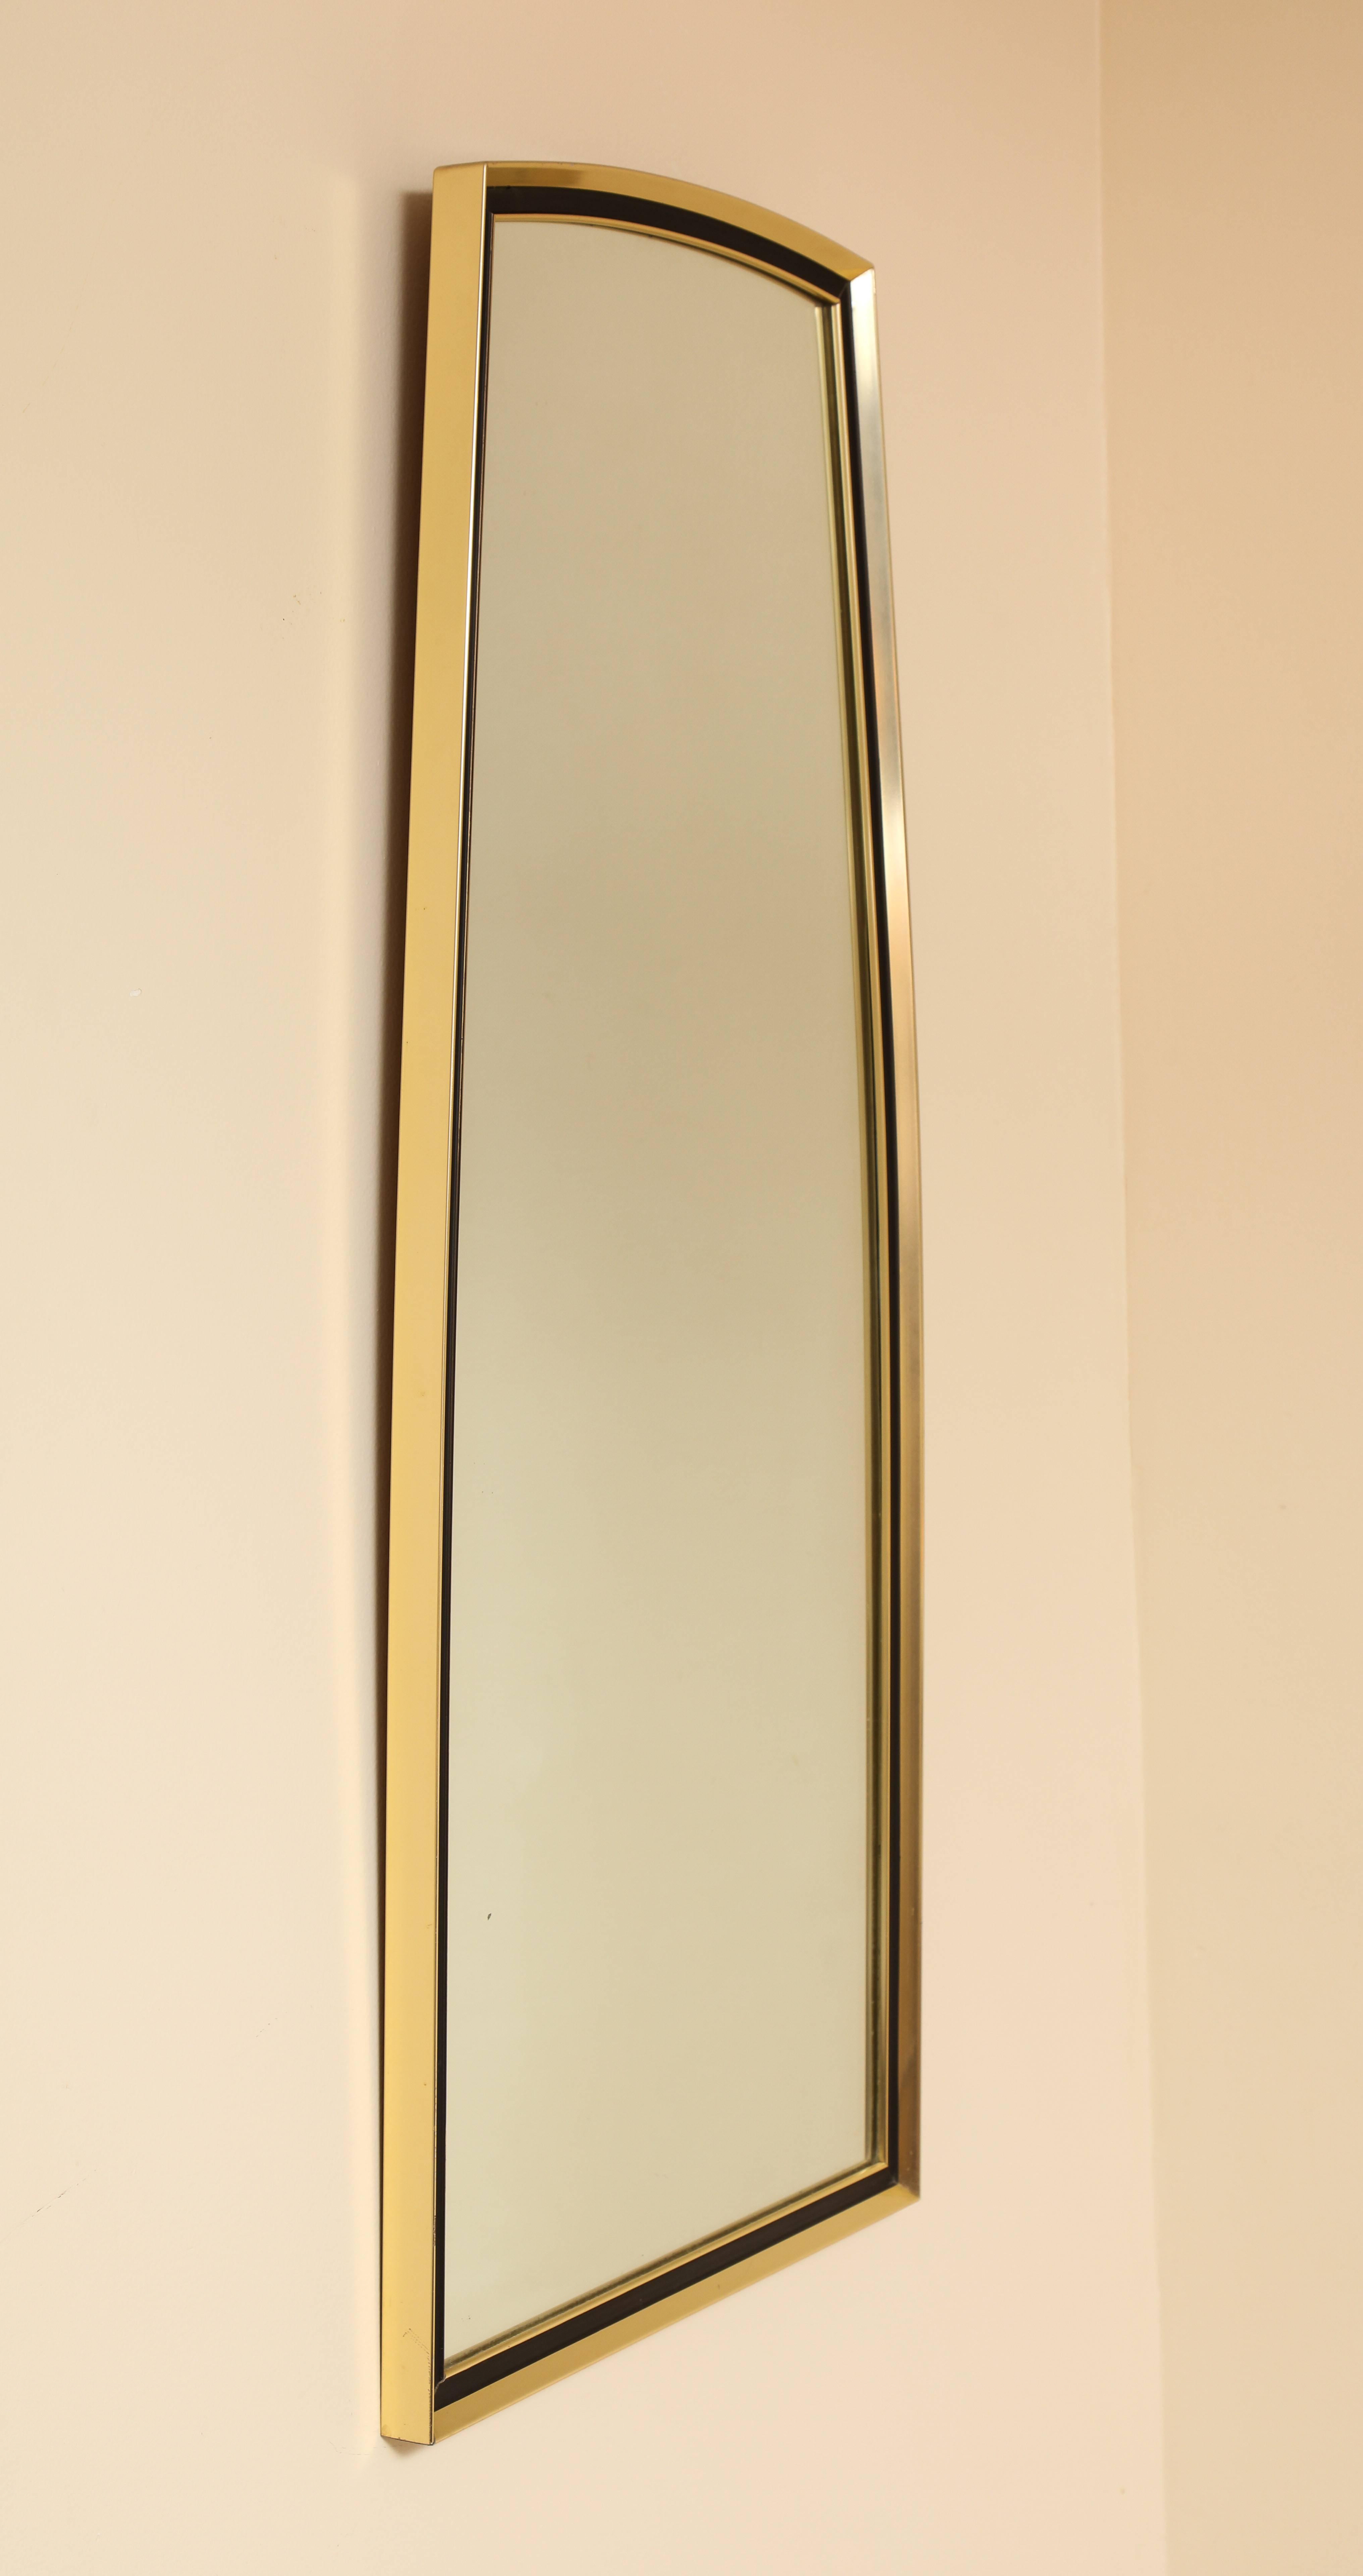 A gold and metal shaped wall mirror by Turner Manufacturing; with original stamp, circa mid-1960s.
 
Size: 36 1/2" high x 16" wide x 1 1/4" deep.
  